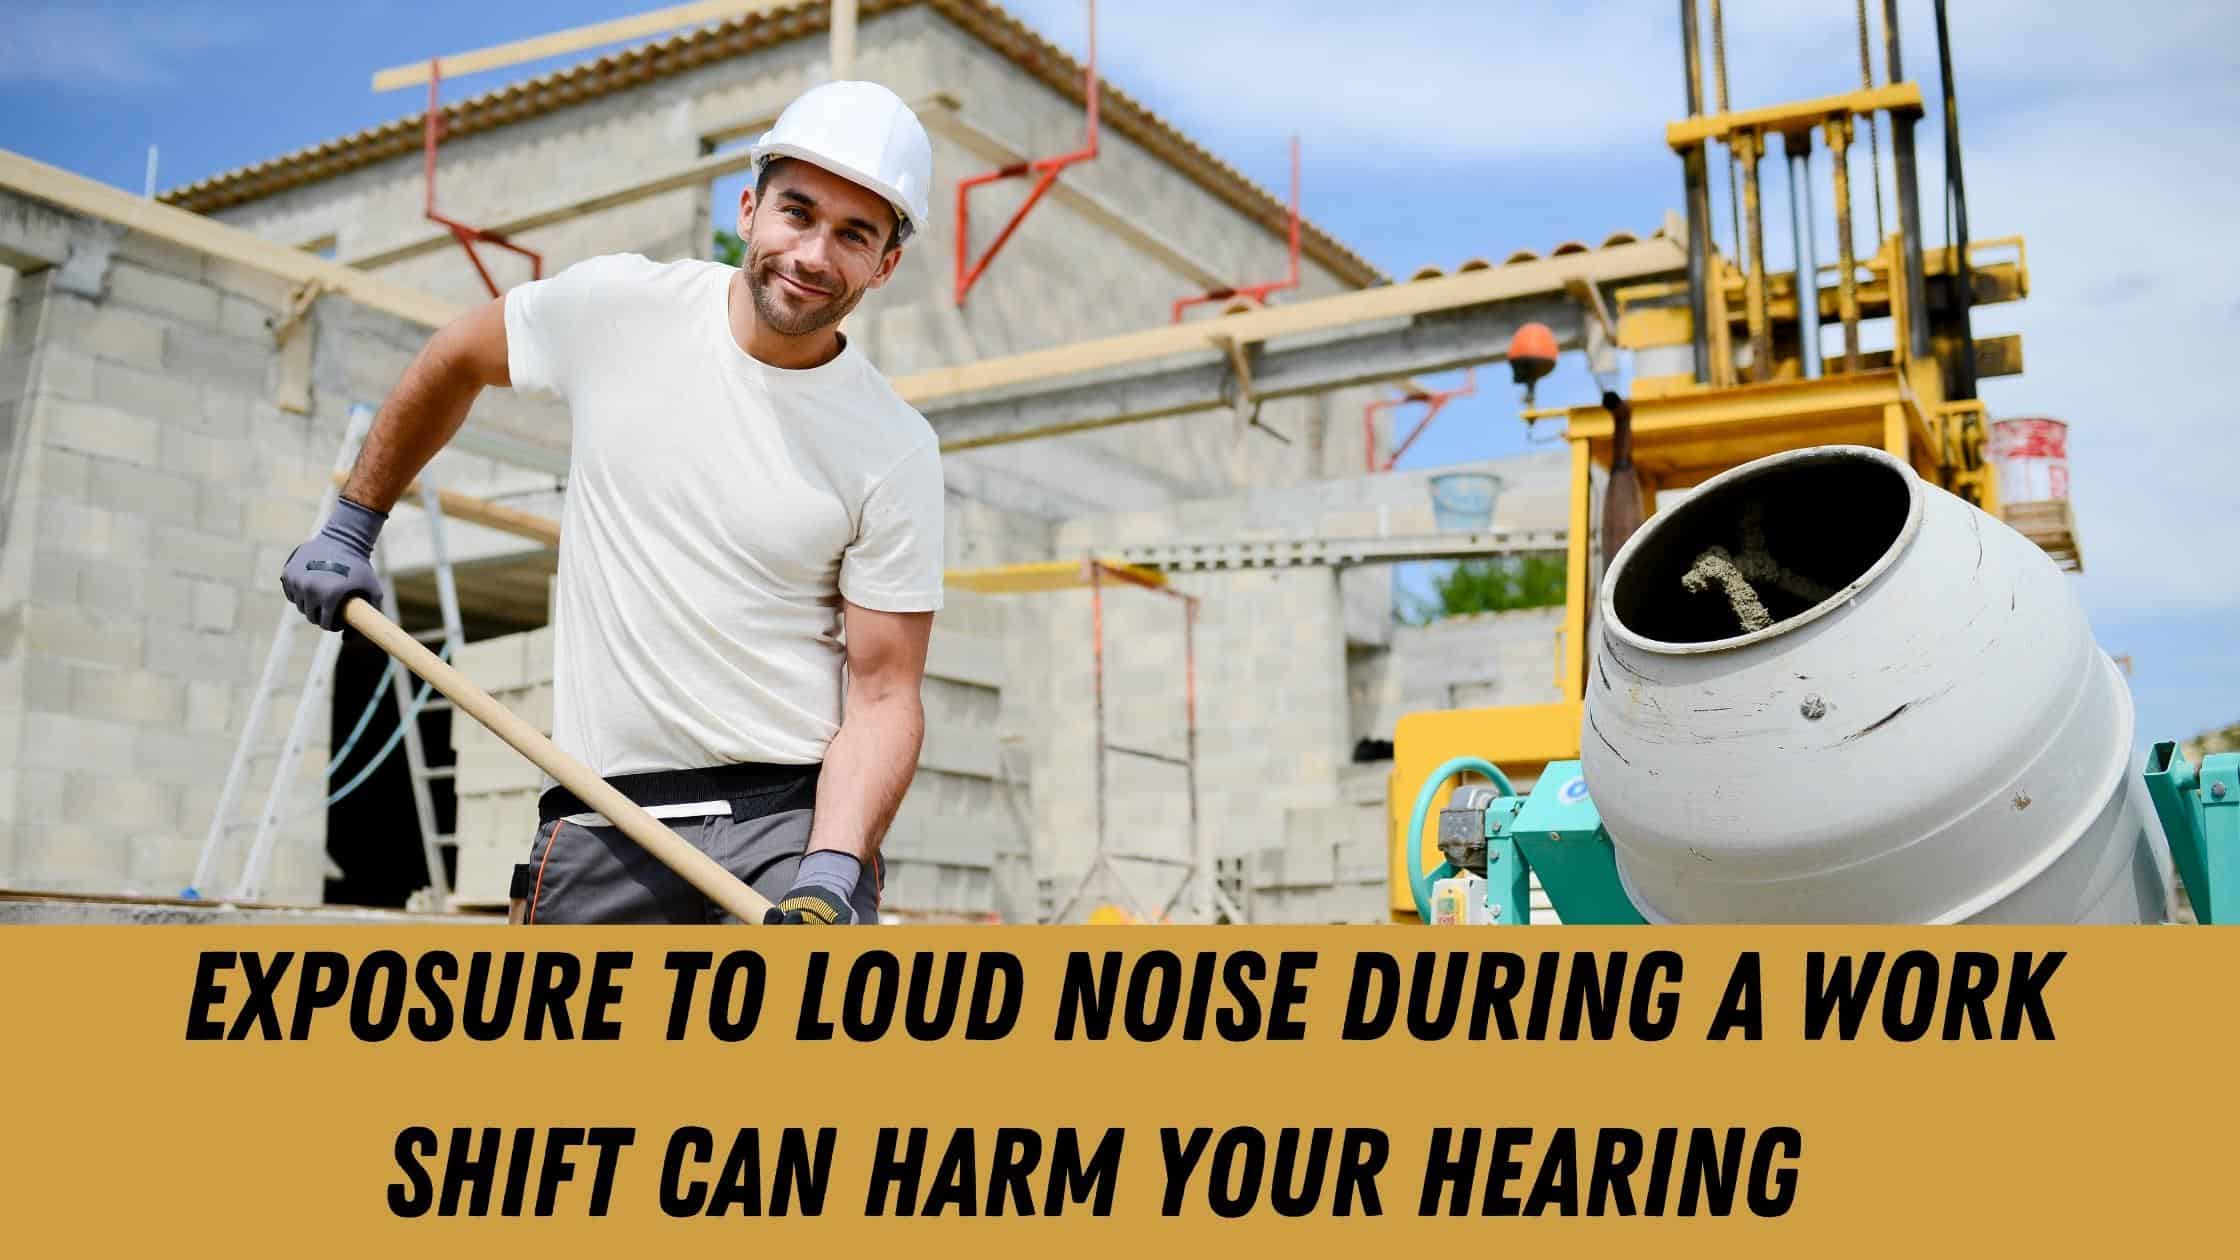 Featured image for “Exposure to Loud Noise During a Work Shift Can Harm Your Hearing”